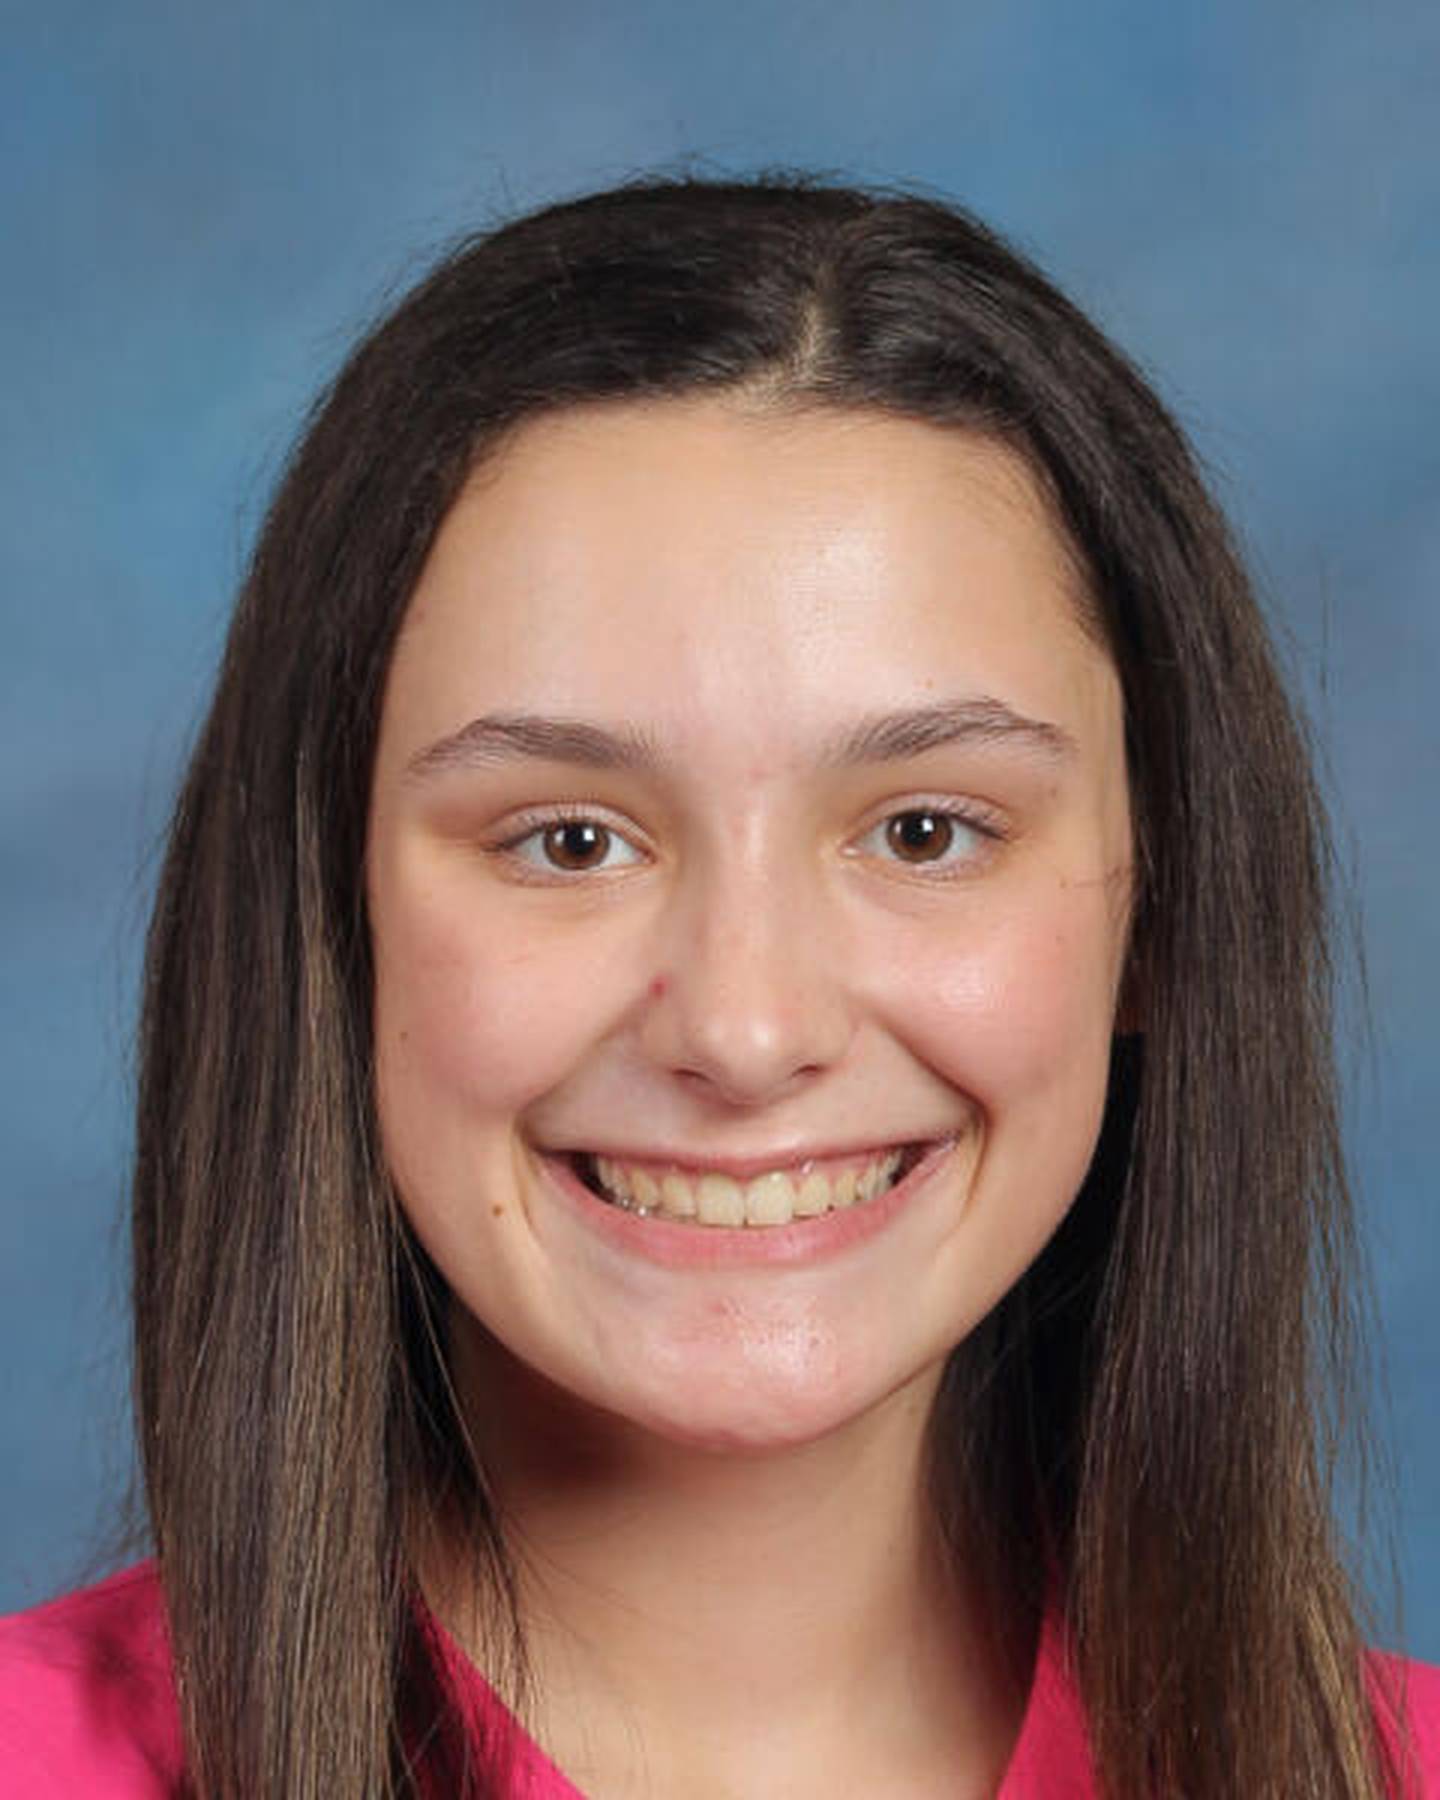 Joliet Catholic Academy named Lily Ray as a Student of the Month for October 2021.